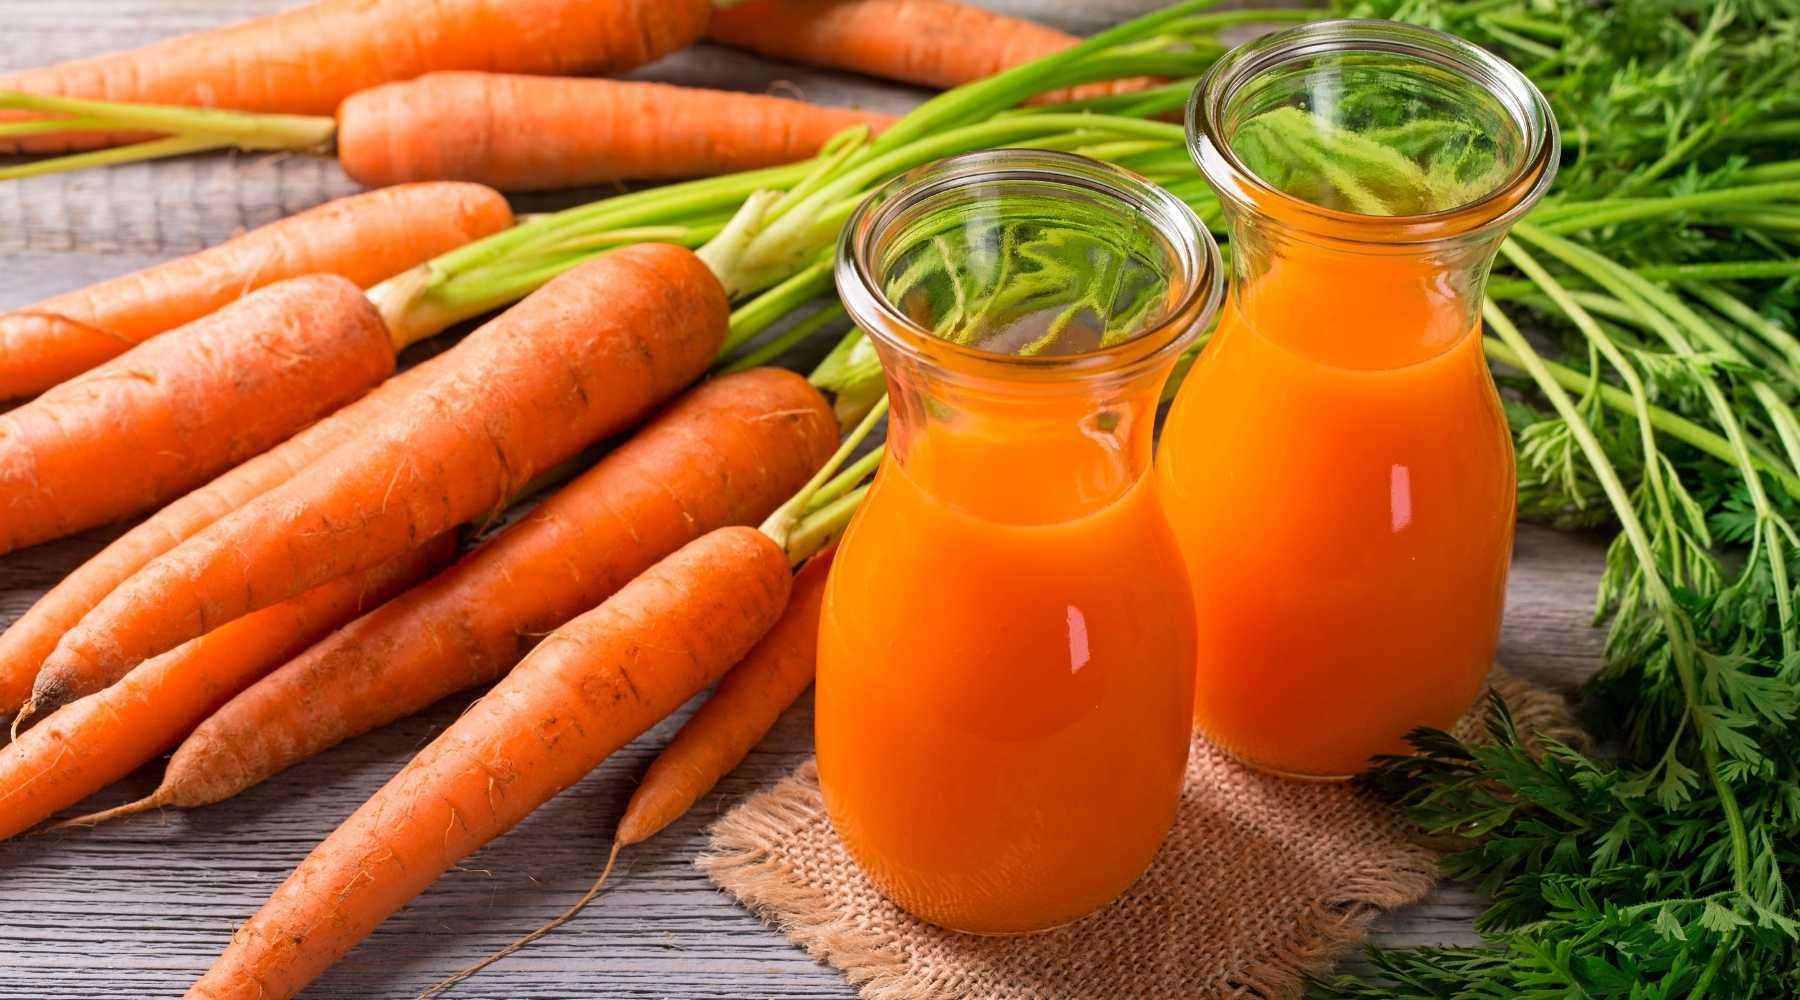 Try This Yummy Carrot Juice To Improve Eyesight